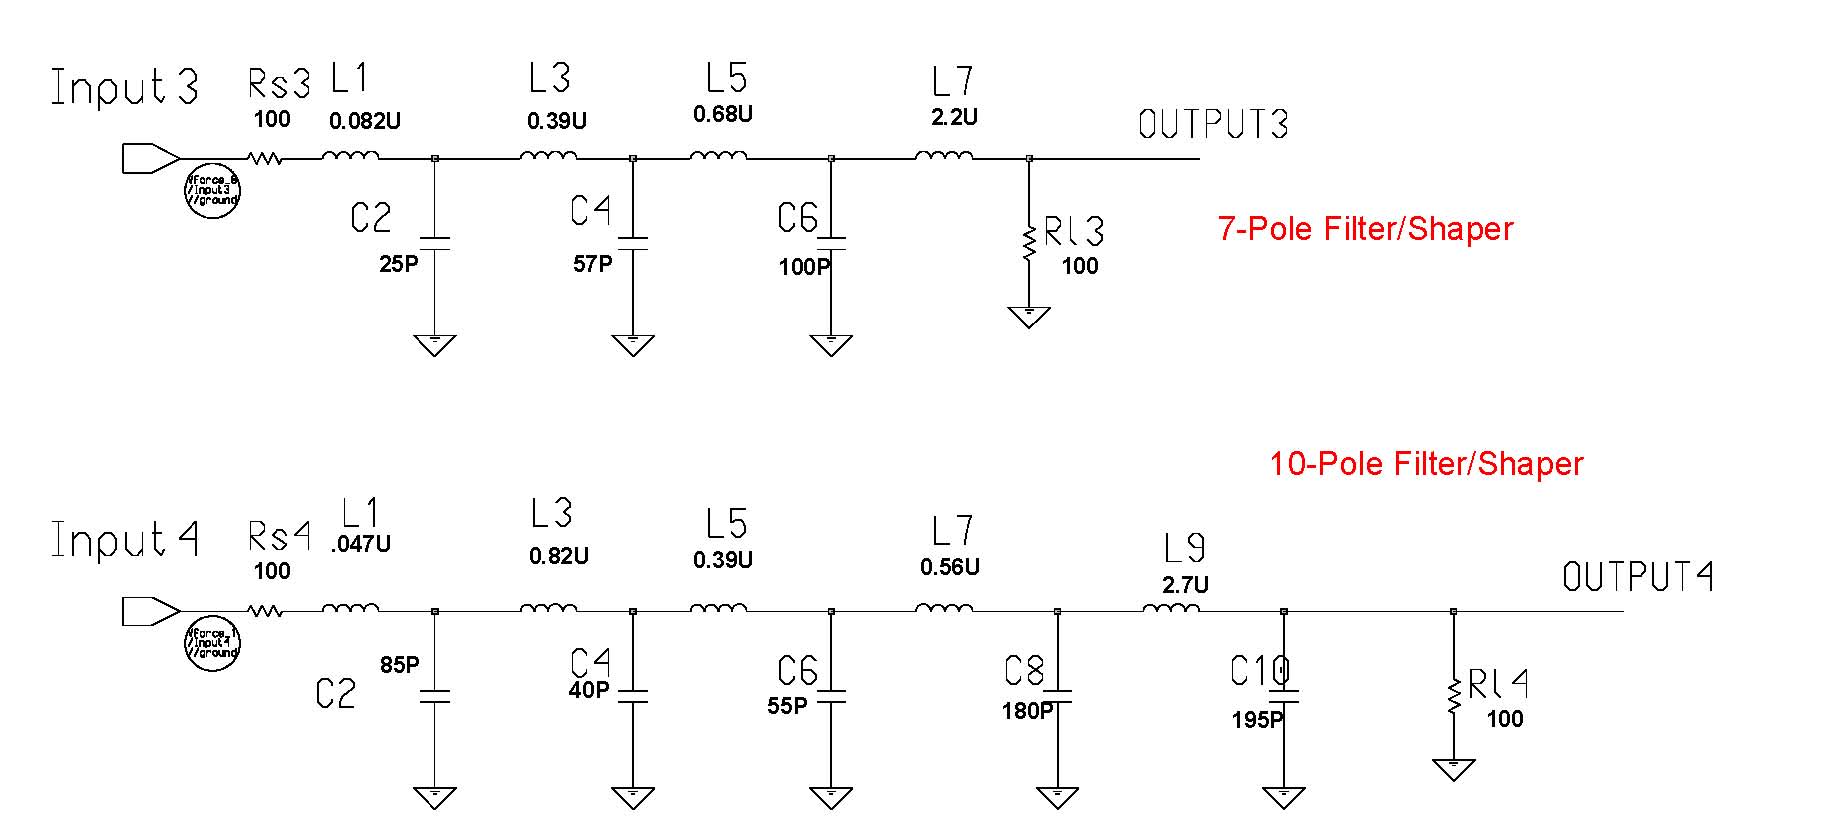 10-pole and 7-pole schematic